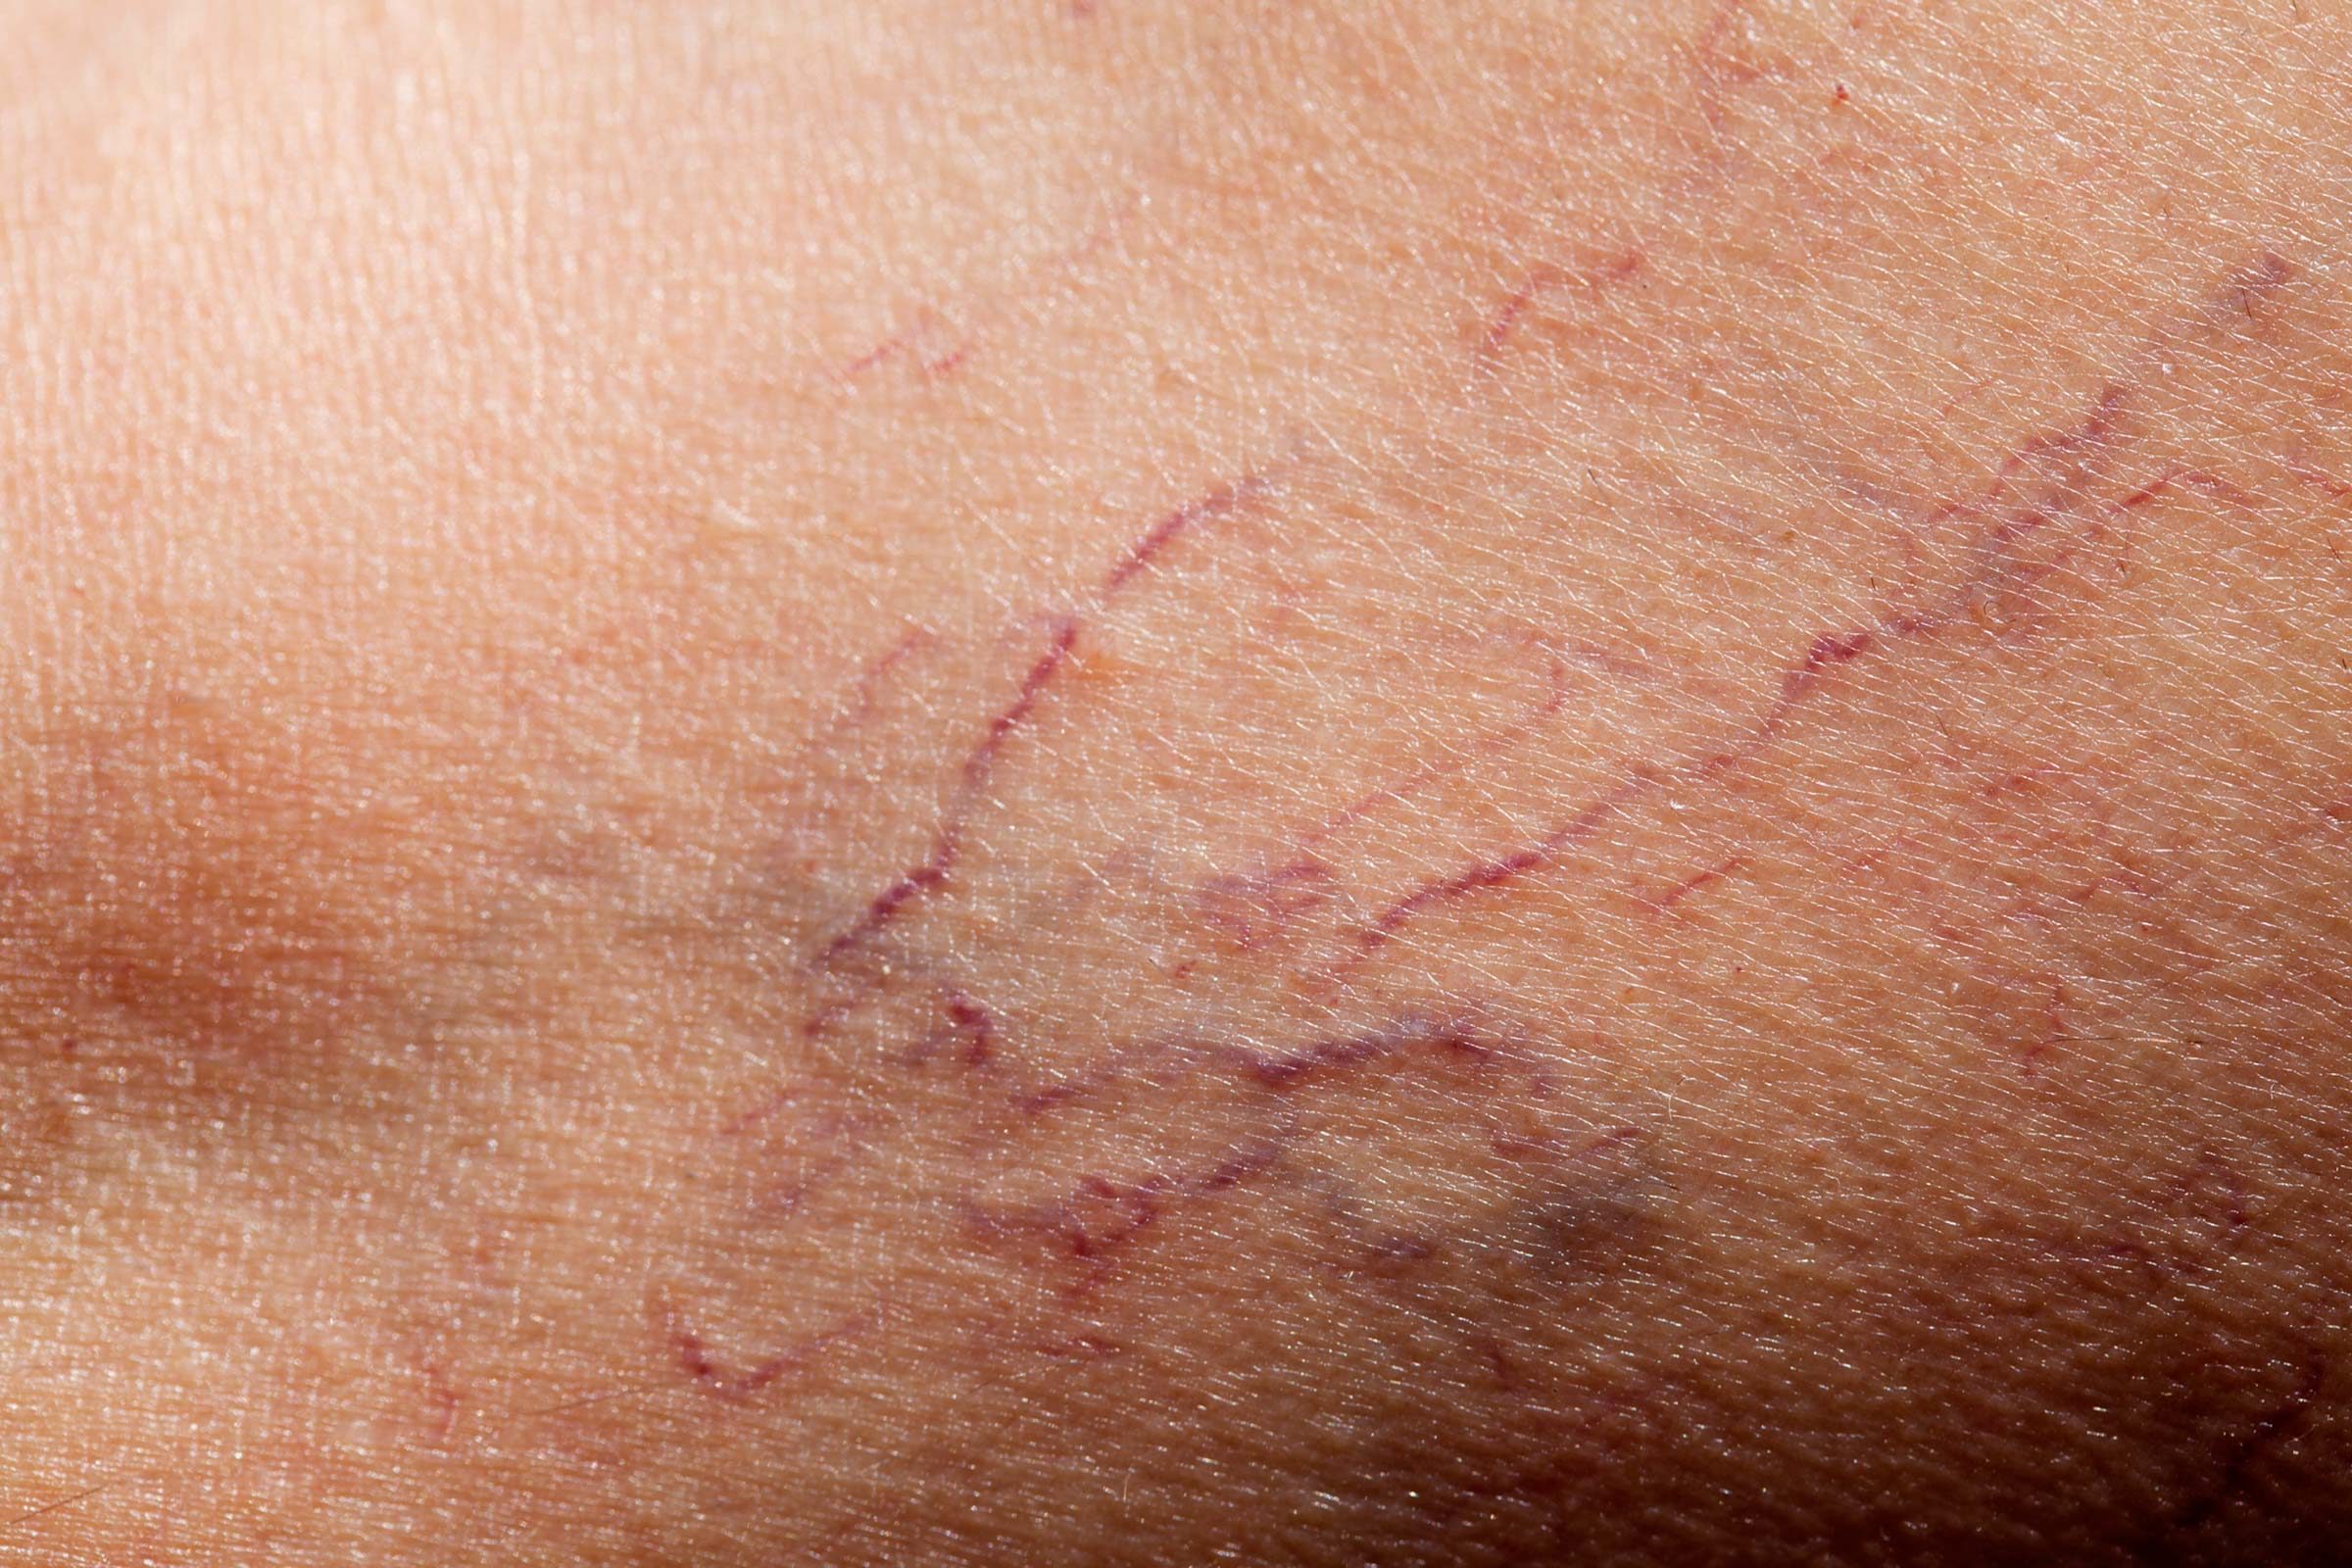 How To Erase And Prevent Broken Capillaries The Healthy